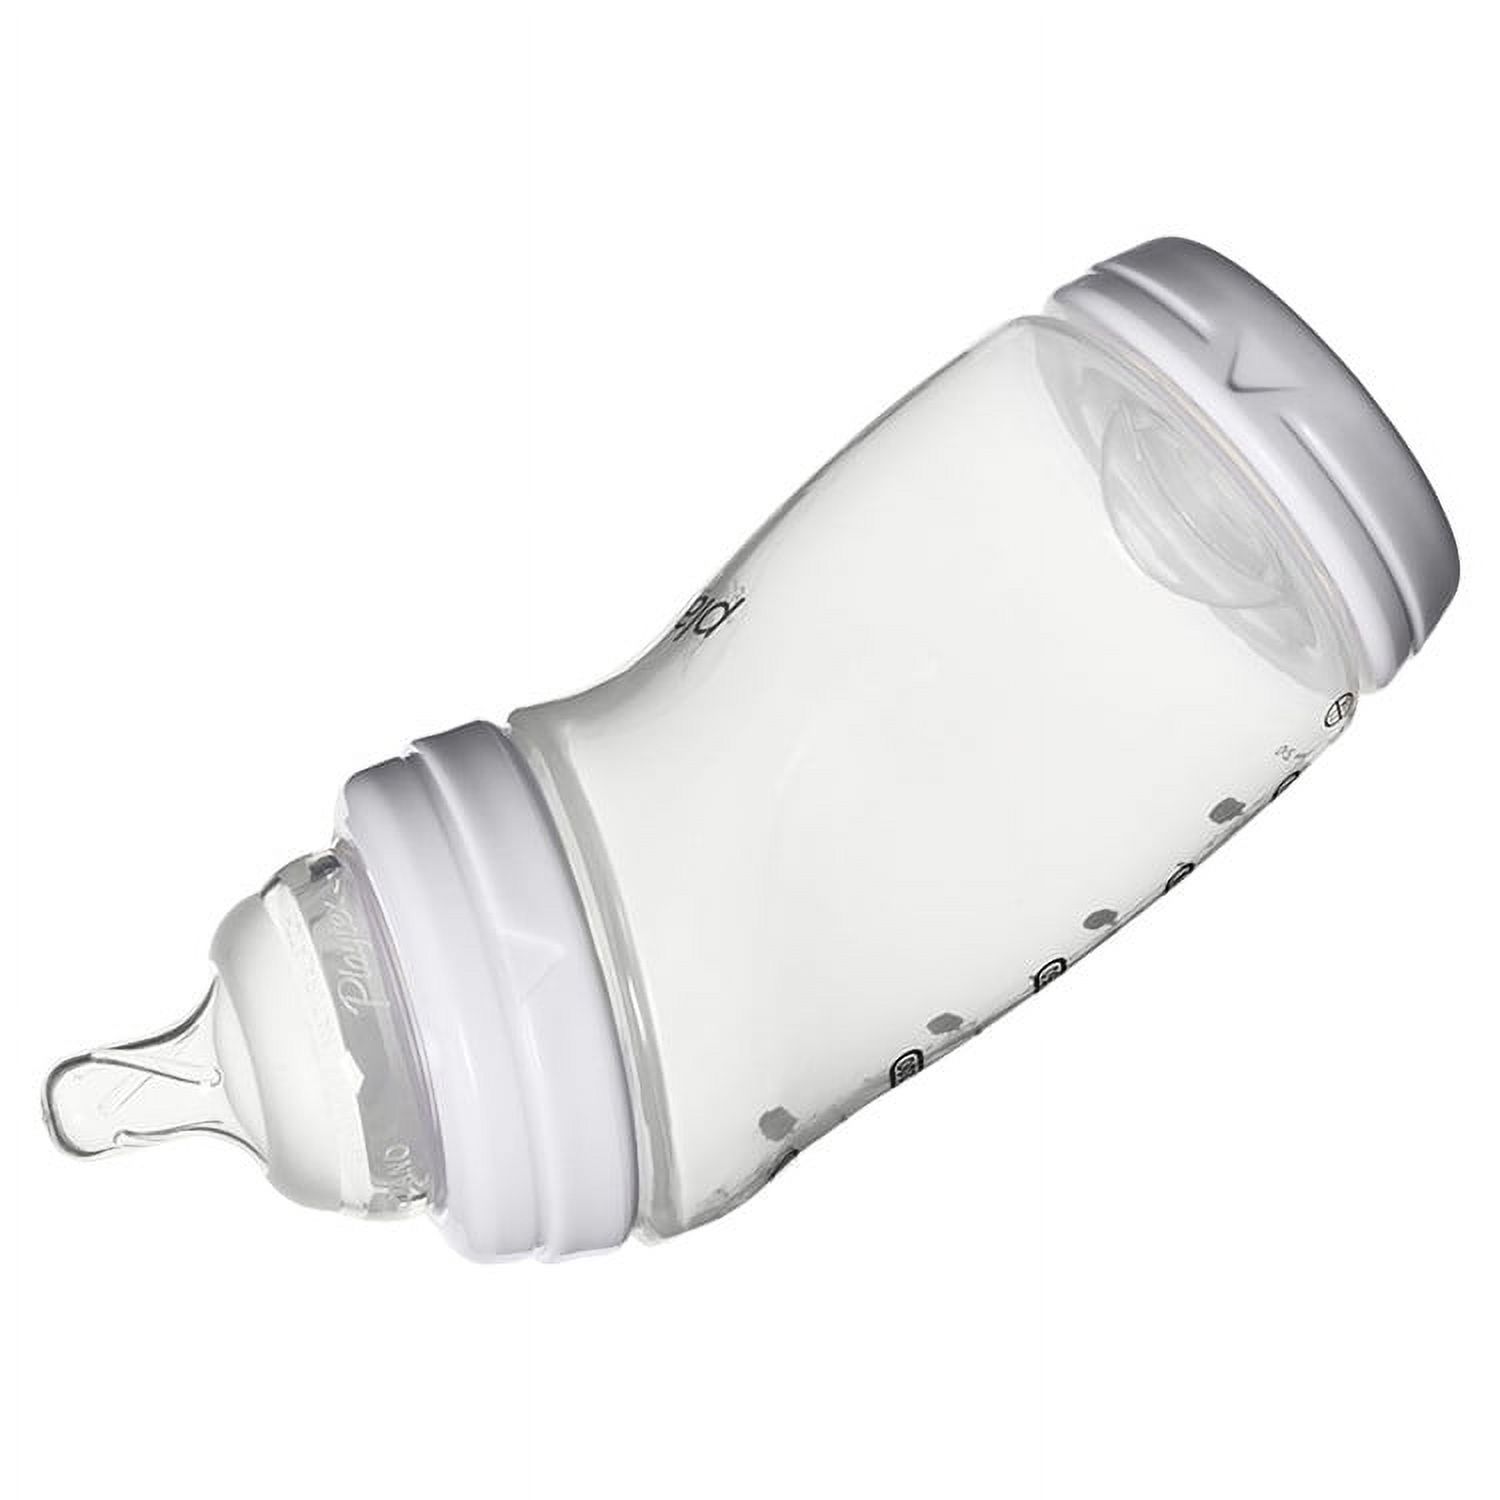 Playtex Ventaire Adv Wide Bottle 9oz 3pk - image 4 of 13